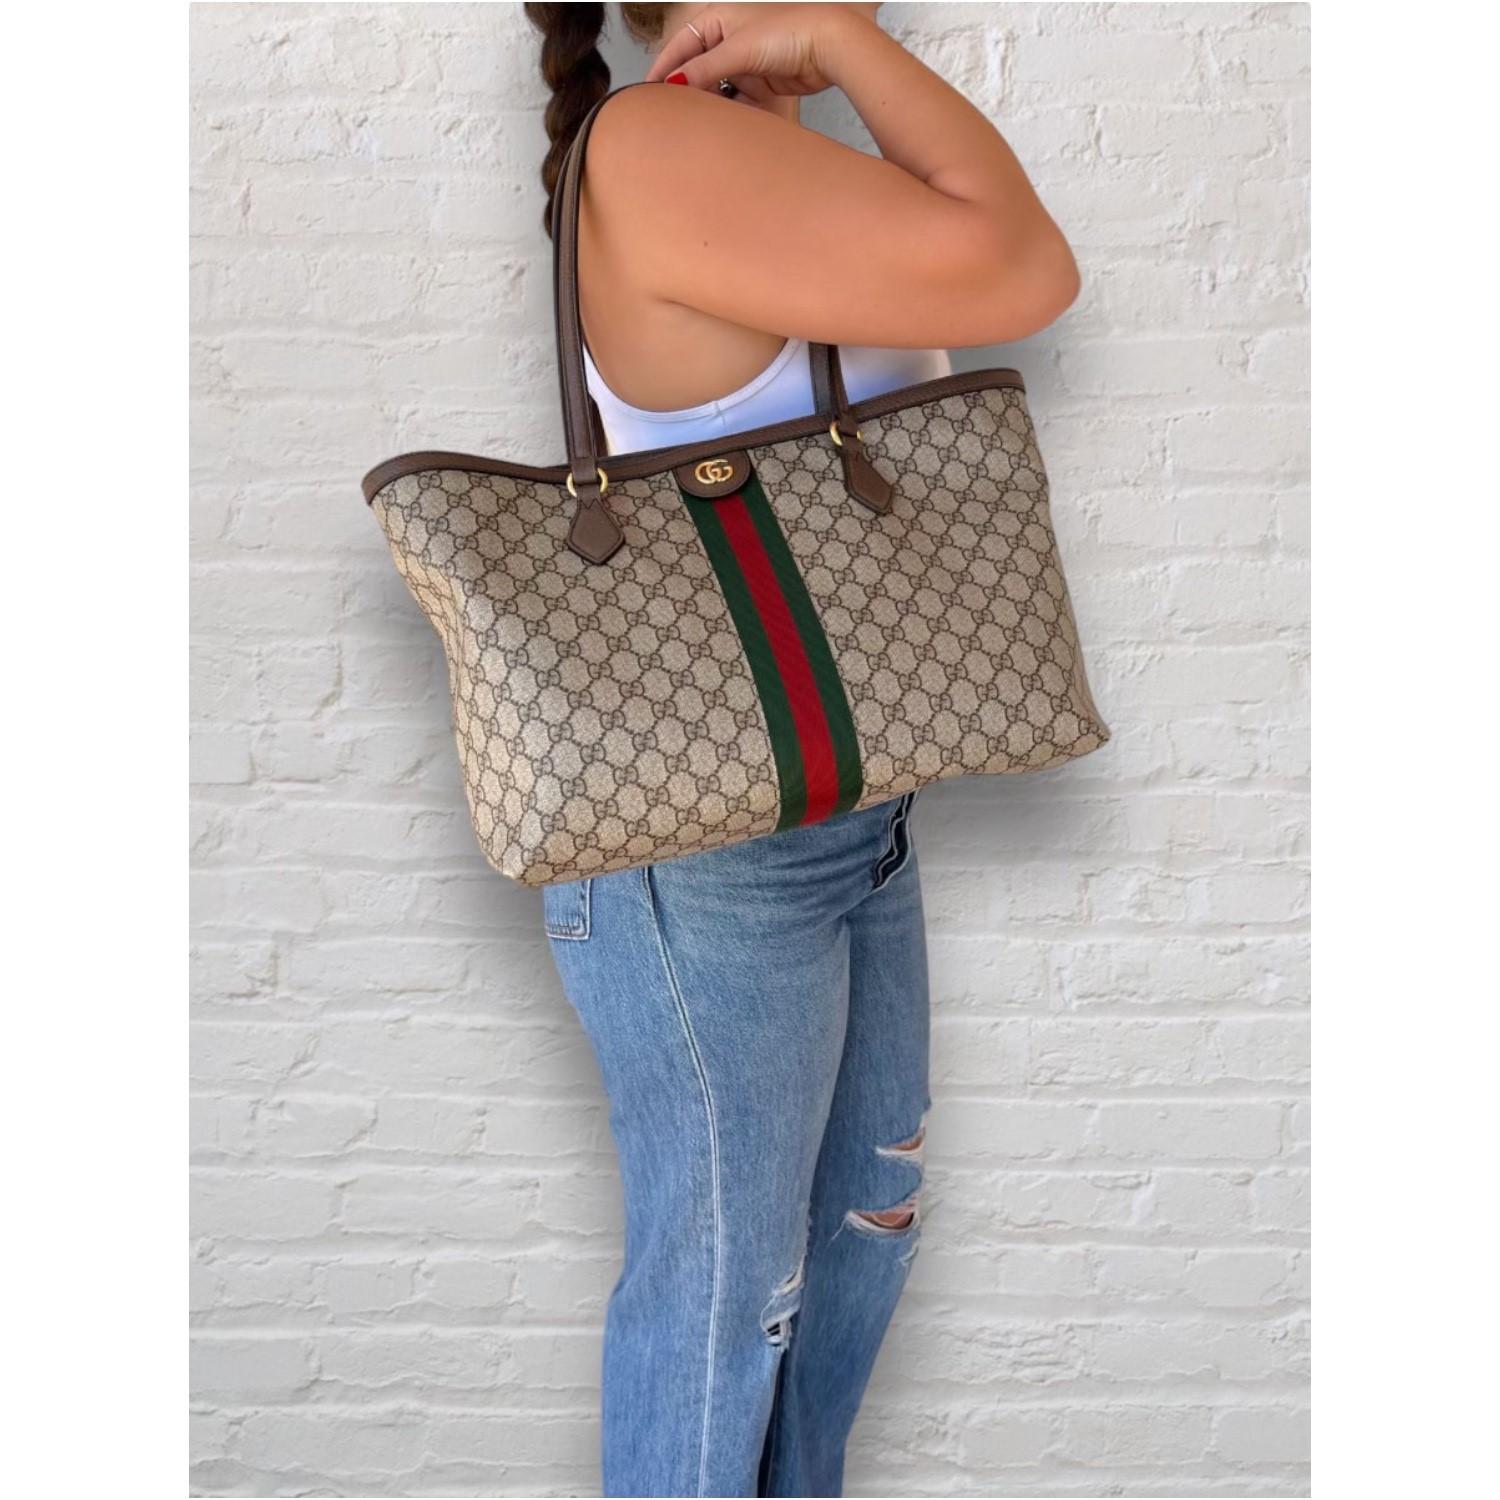 This Gucci GG Supreme Medium Ophidia Tote was made in Italy and it is finely crafted of the classic Gucci GG Supreme coated canvas exterior with leather trimming and gold-tone hardware features. It has a magnetic top closure that opens up to a very